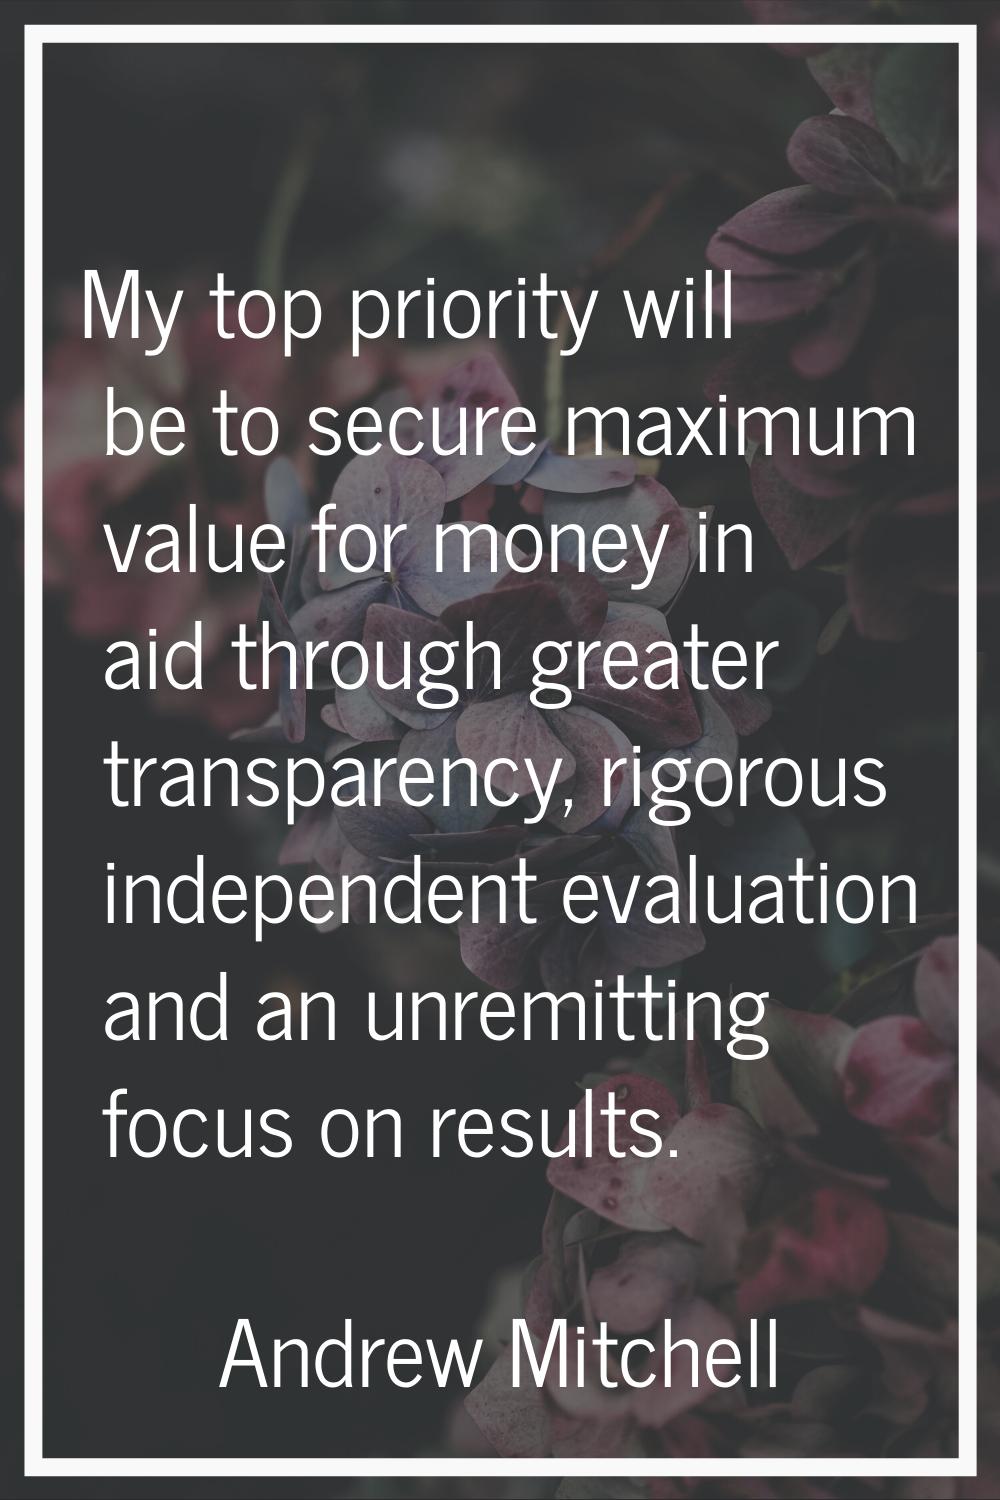 My top priority will be to secure maximum value for money in aid through greater transparency, rigo